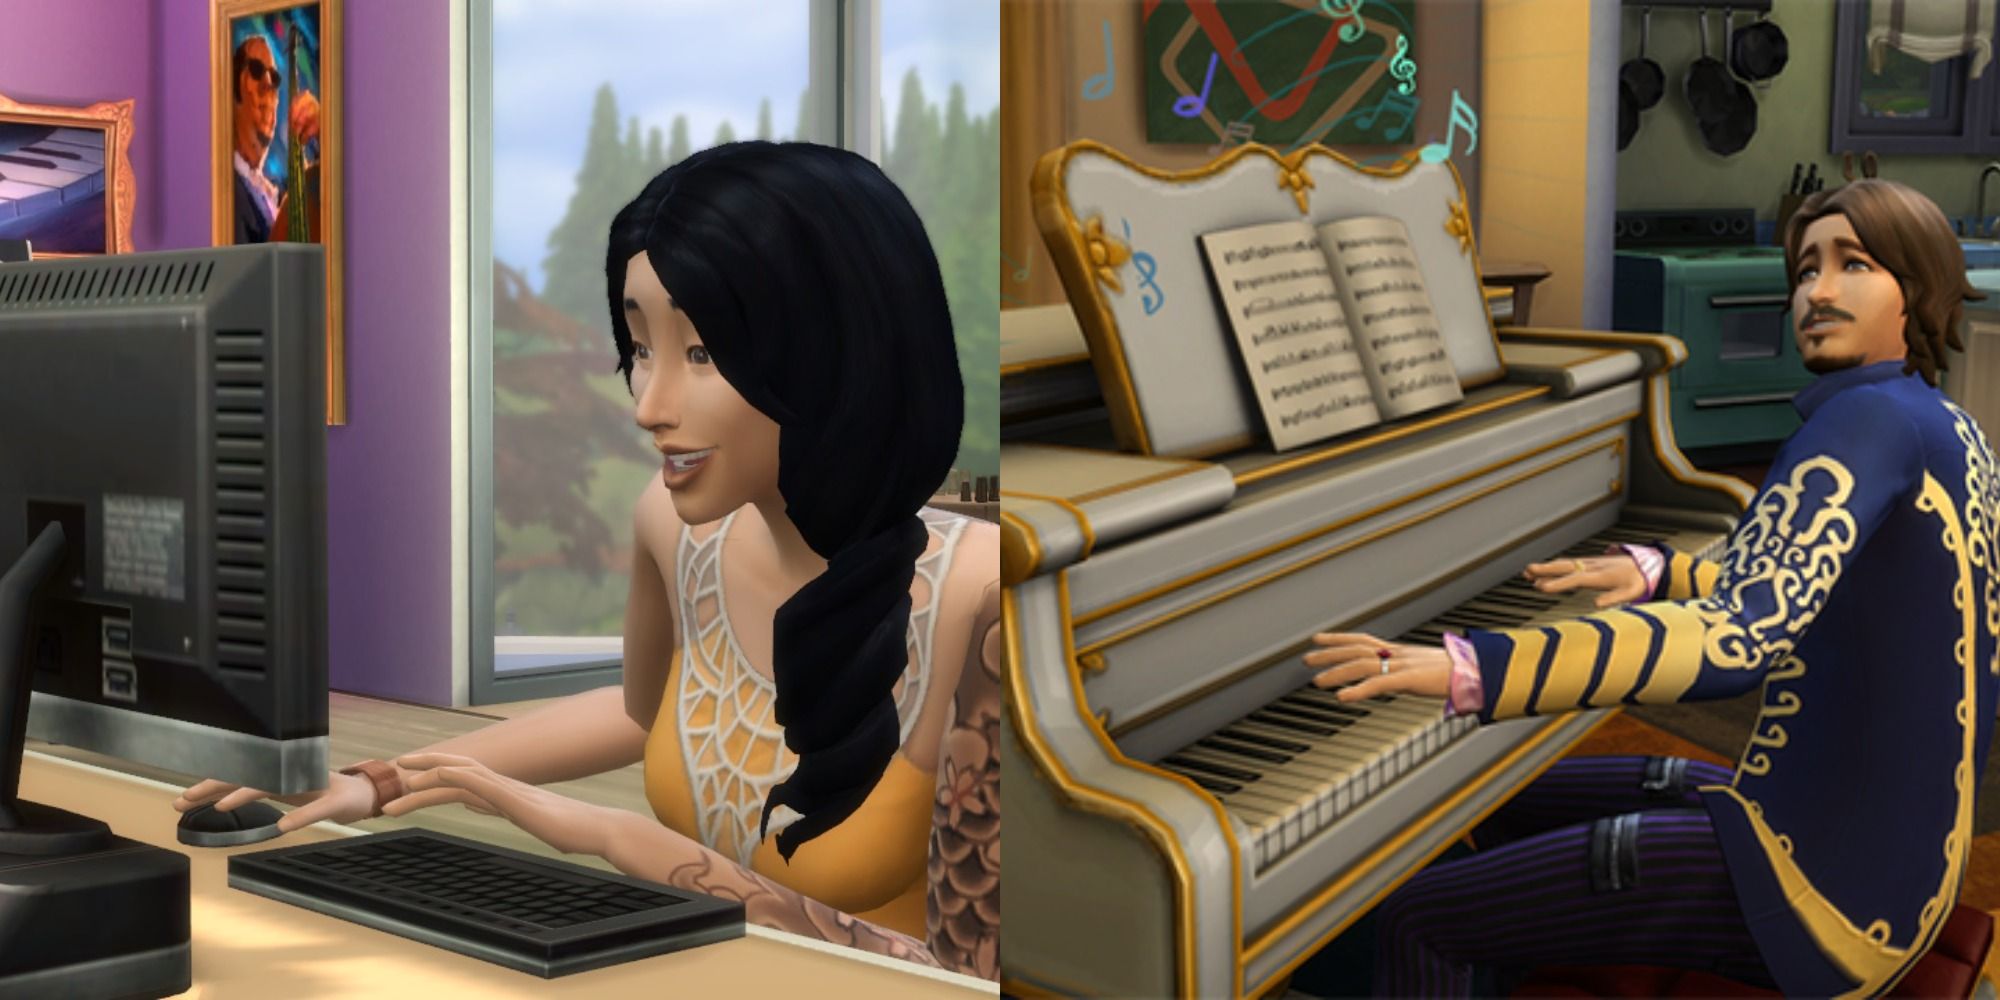 Split image showing a sim on a computer and one playing piano in The Sims 4.